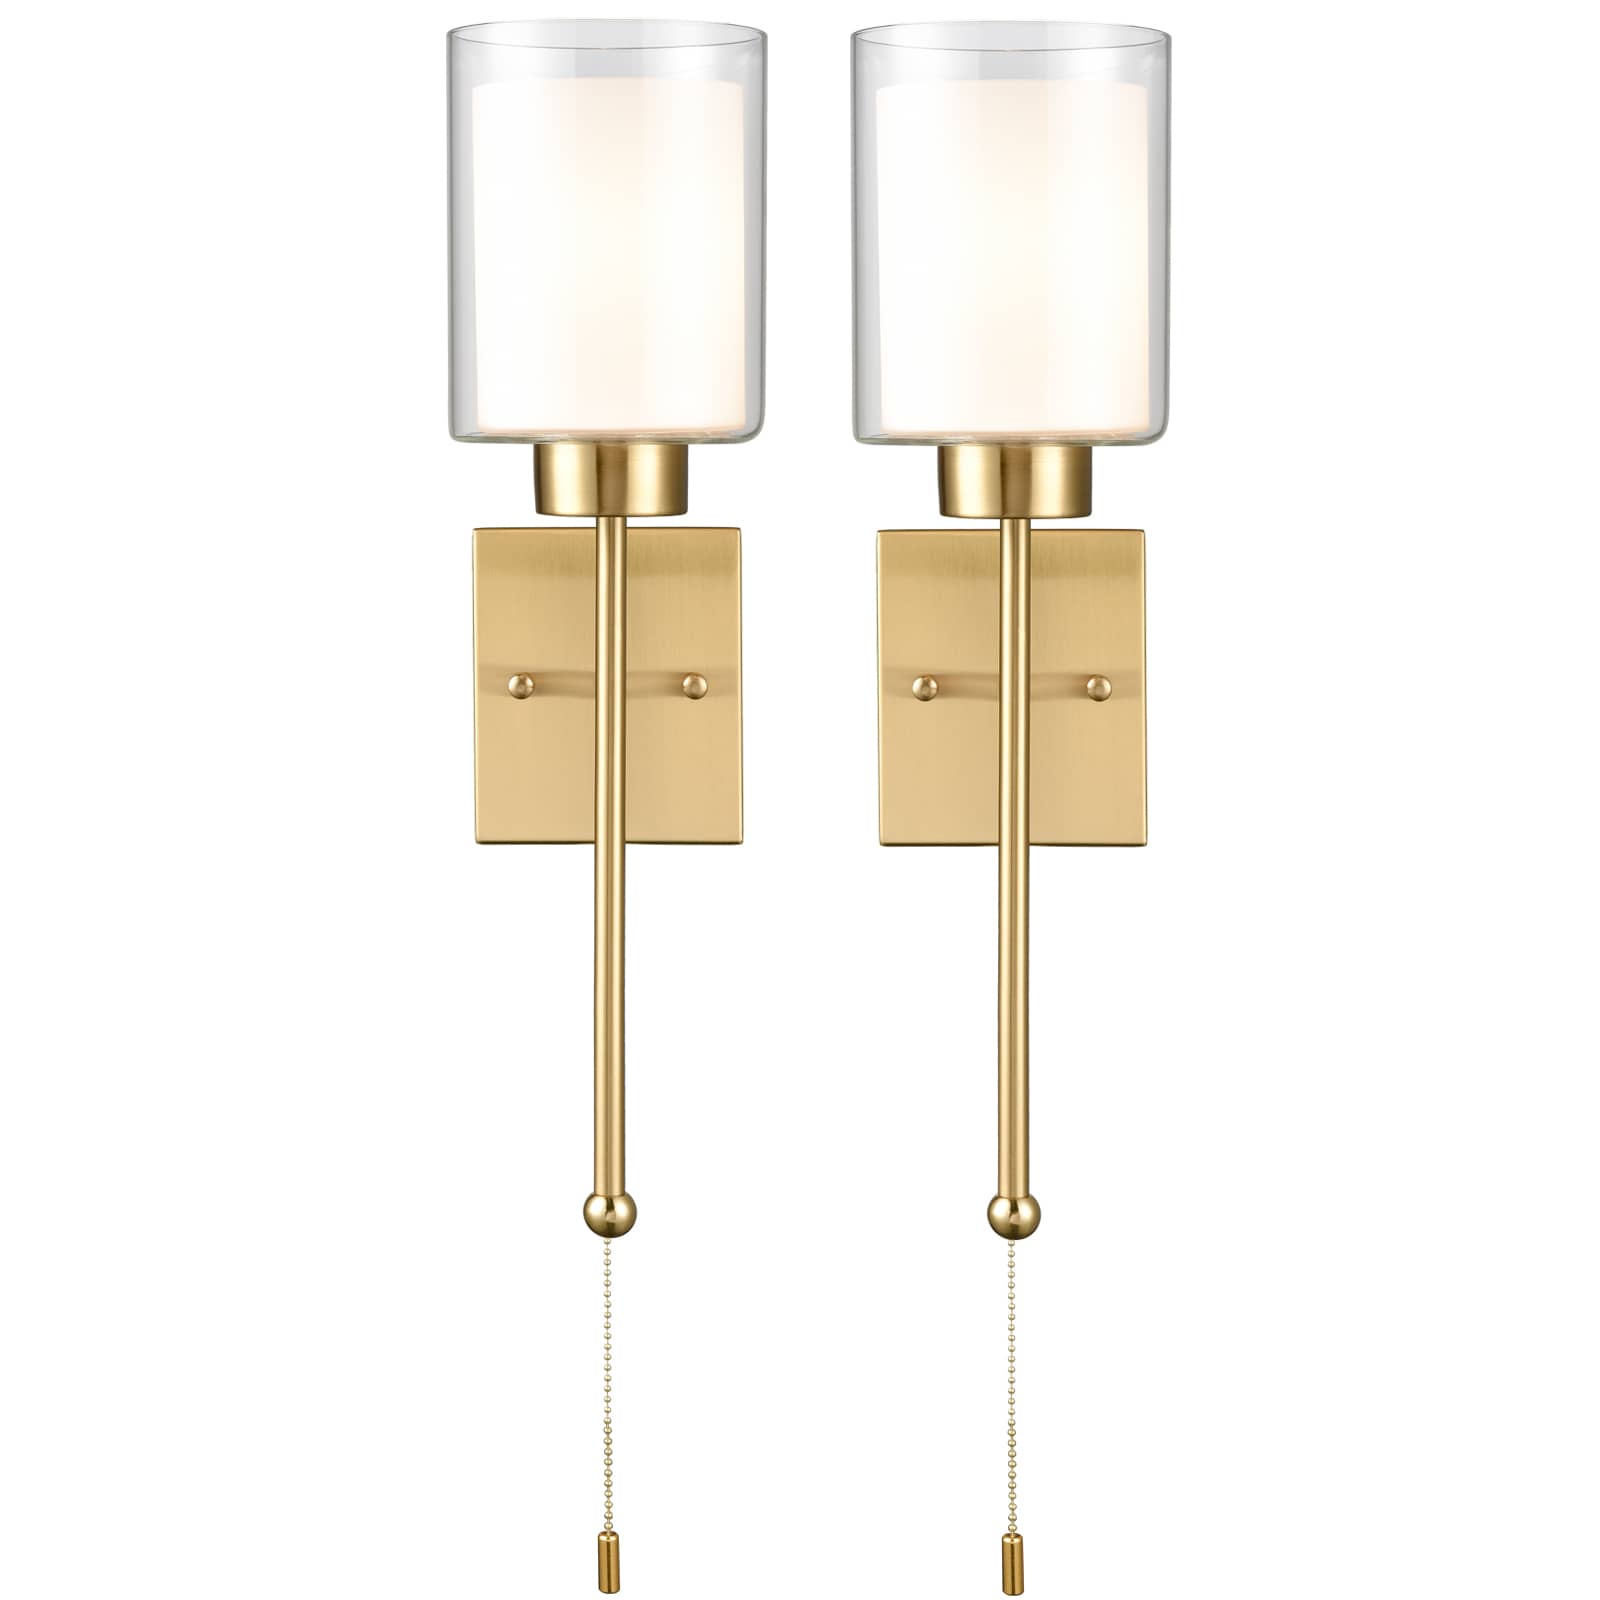 Sets of 2 Gold With Dual Glass Shade Wall Light fixture with Pull Chain On/Off Switch For Bedroom